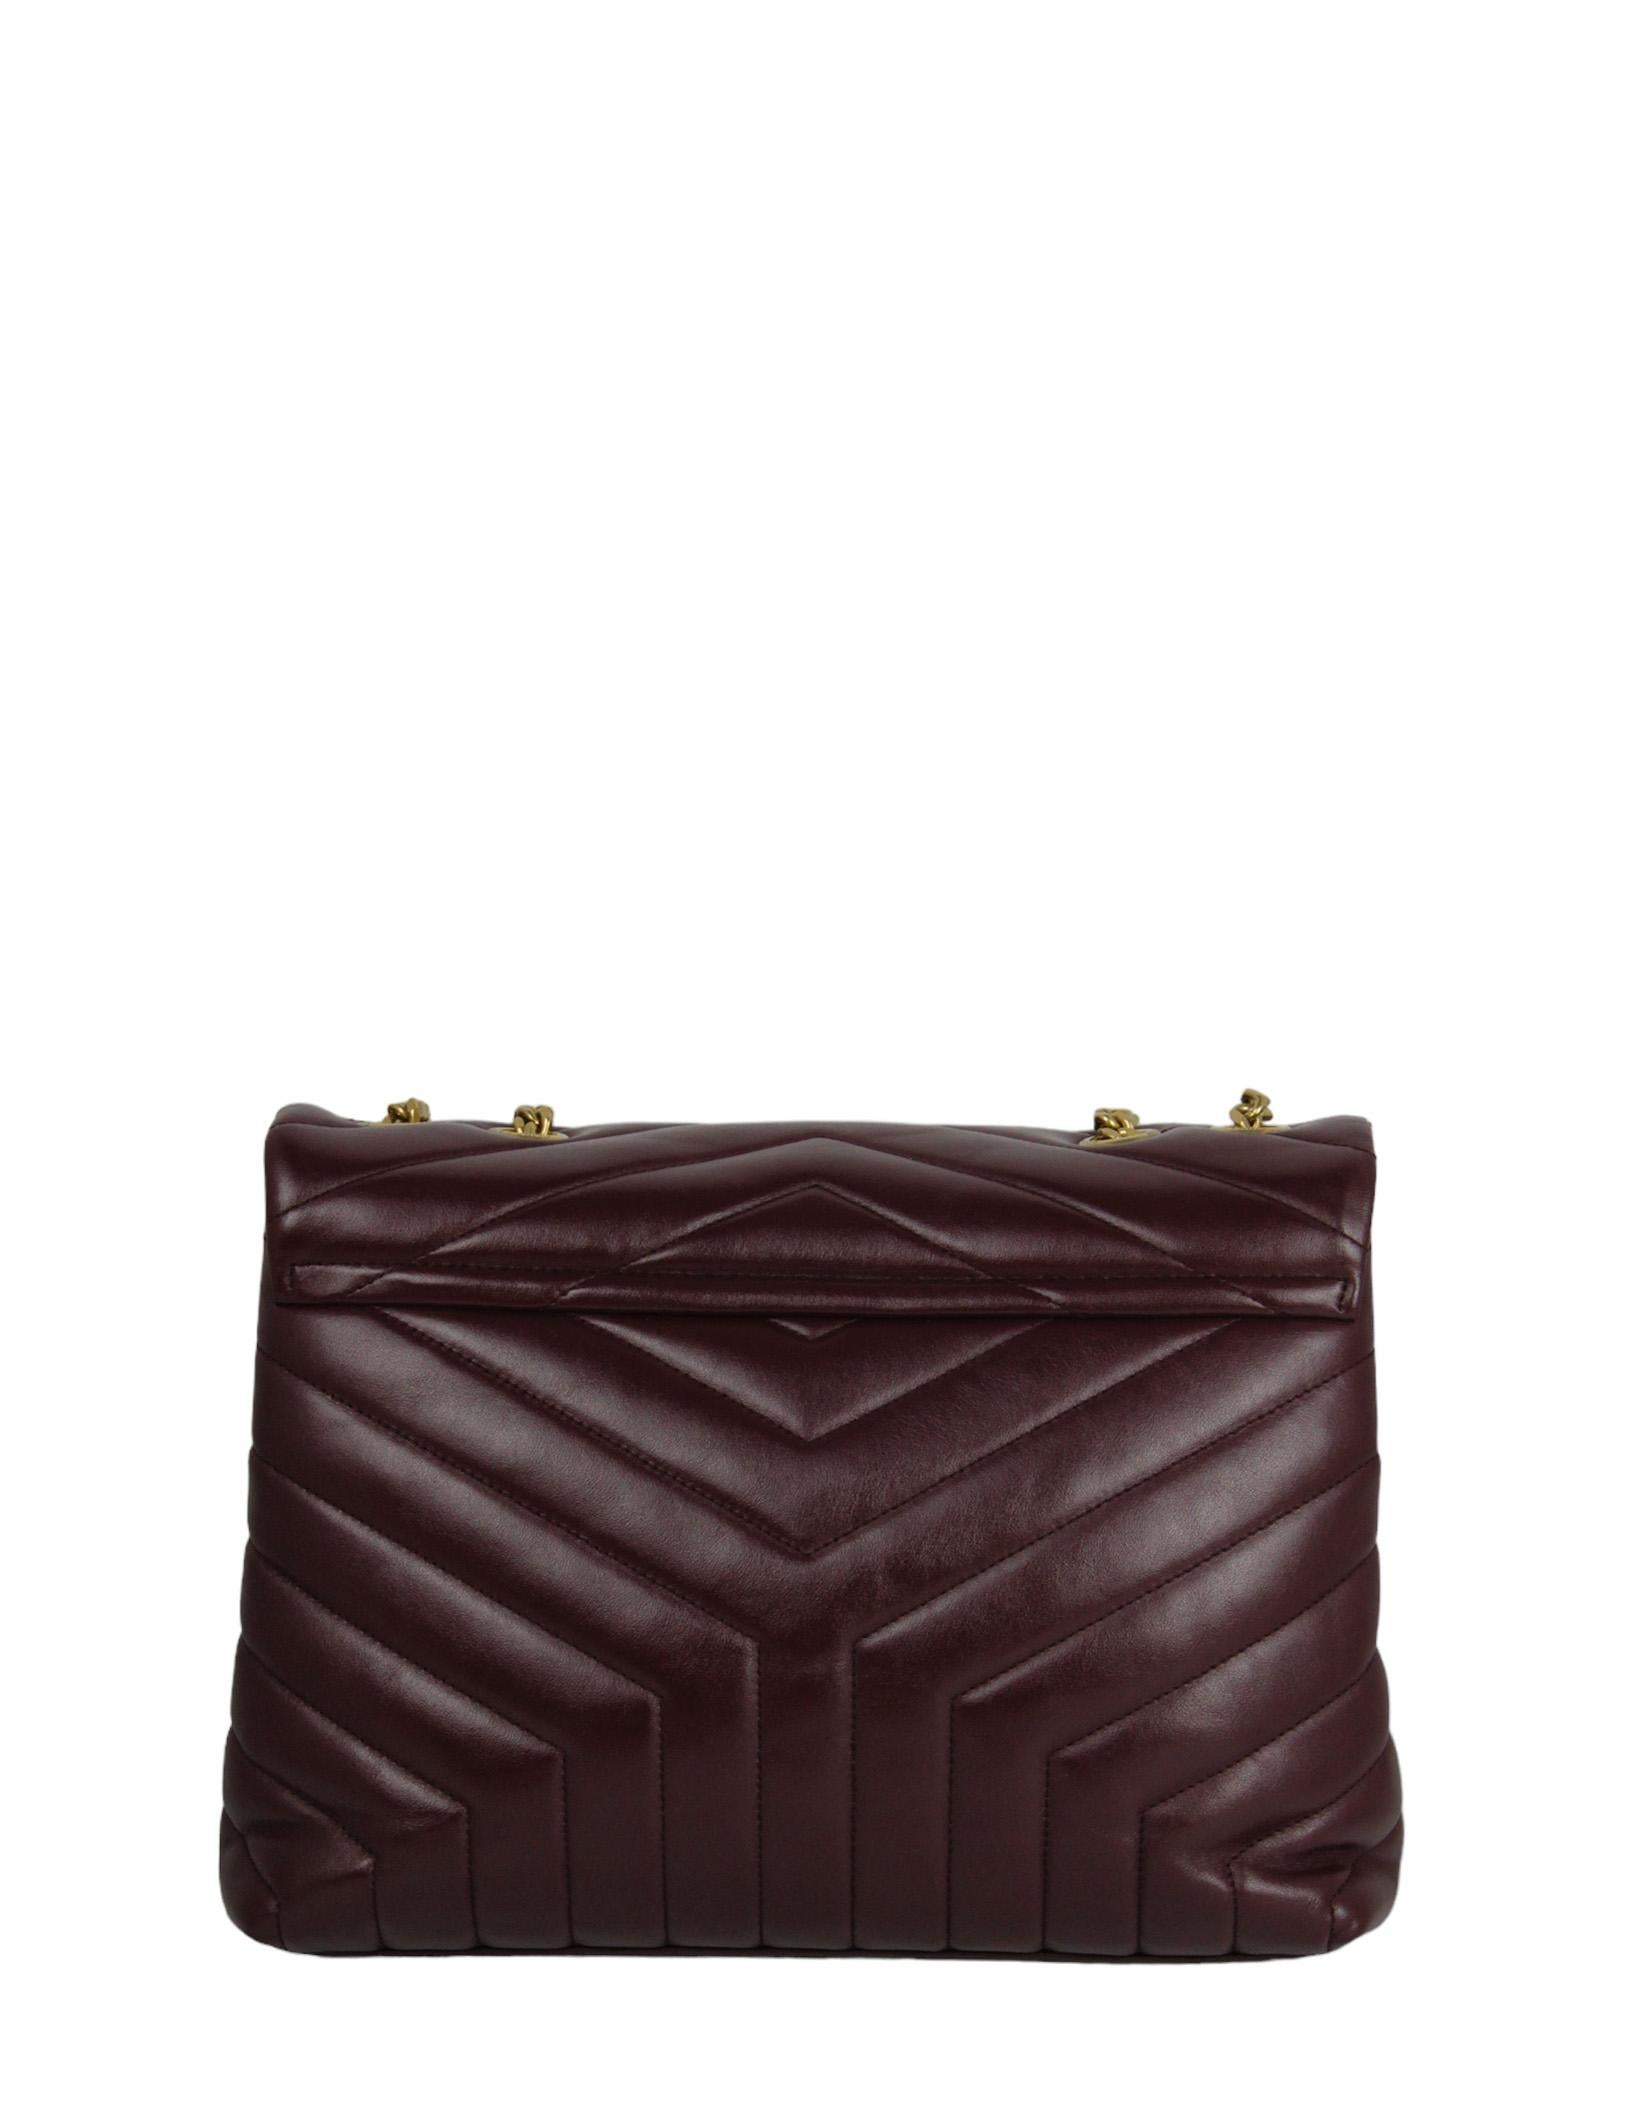 Saint Laurent Burgundy Rouge Legion Calfskin Small Loulou Chain Shoulder Bag

Made In: Italy
Color: Rouge Legion
Hardware: Goldtone
Materials: Calfskin leather, metal
Lining: Black textile 
Closure/Opening: Flap top with magnetic closure
Exterior